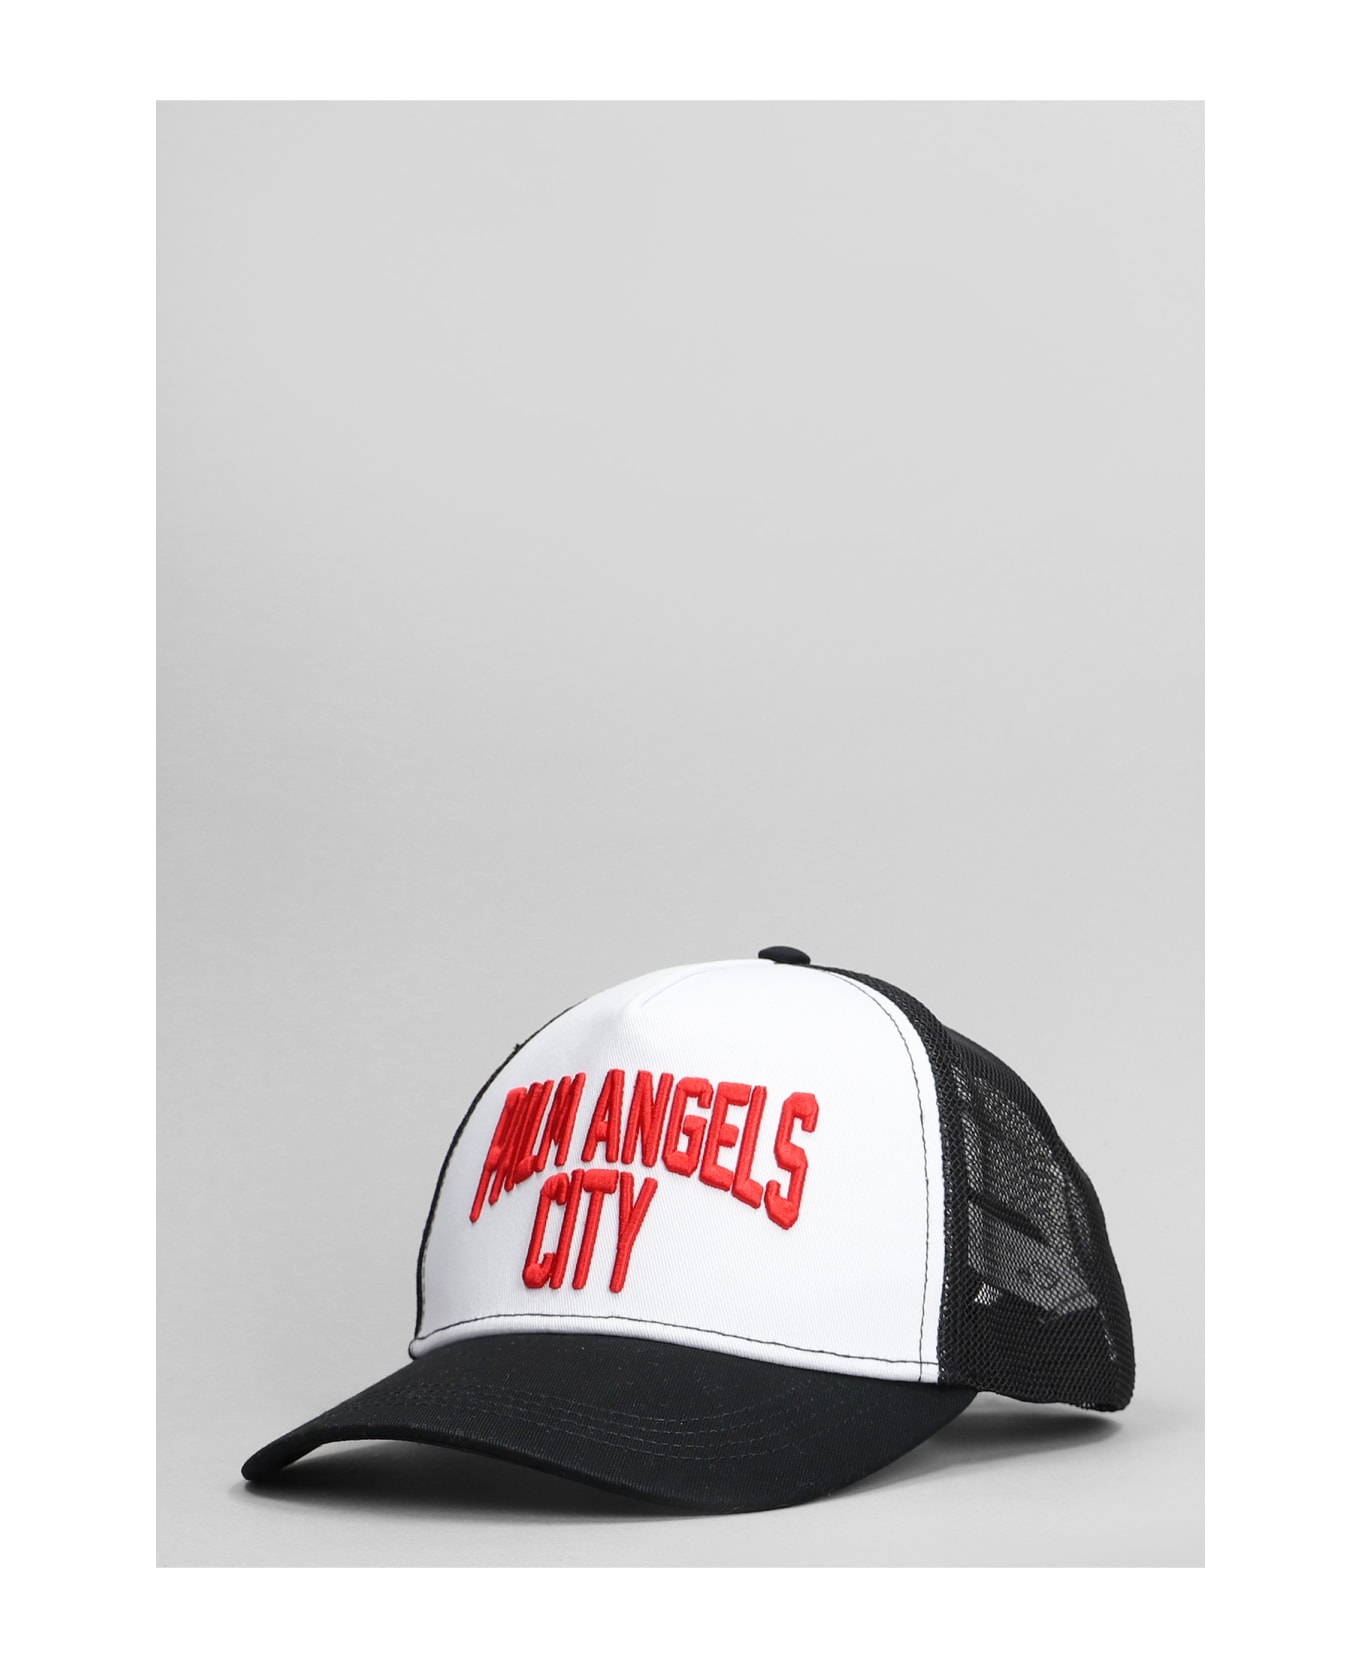 Palm Angels Hats In Black Cotton - black